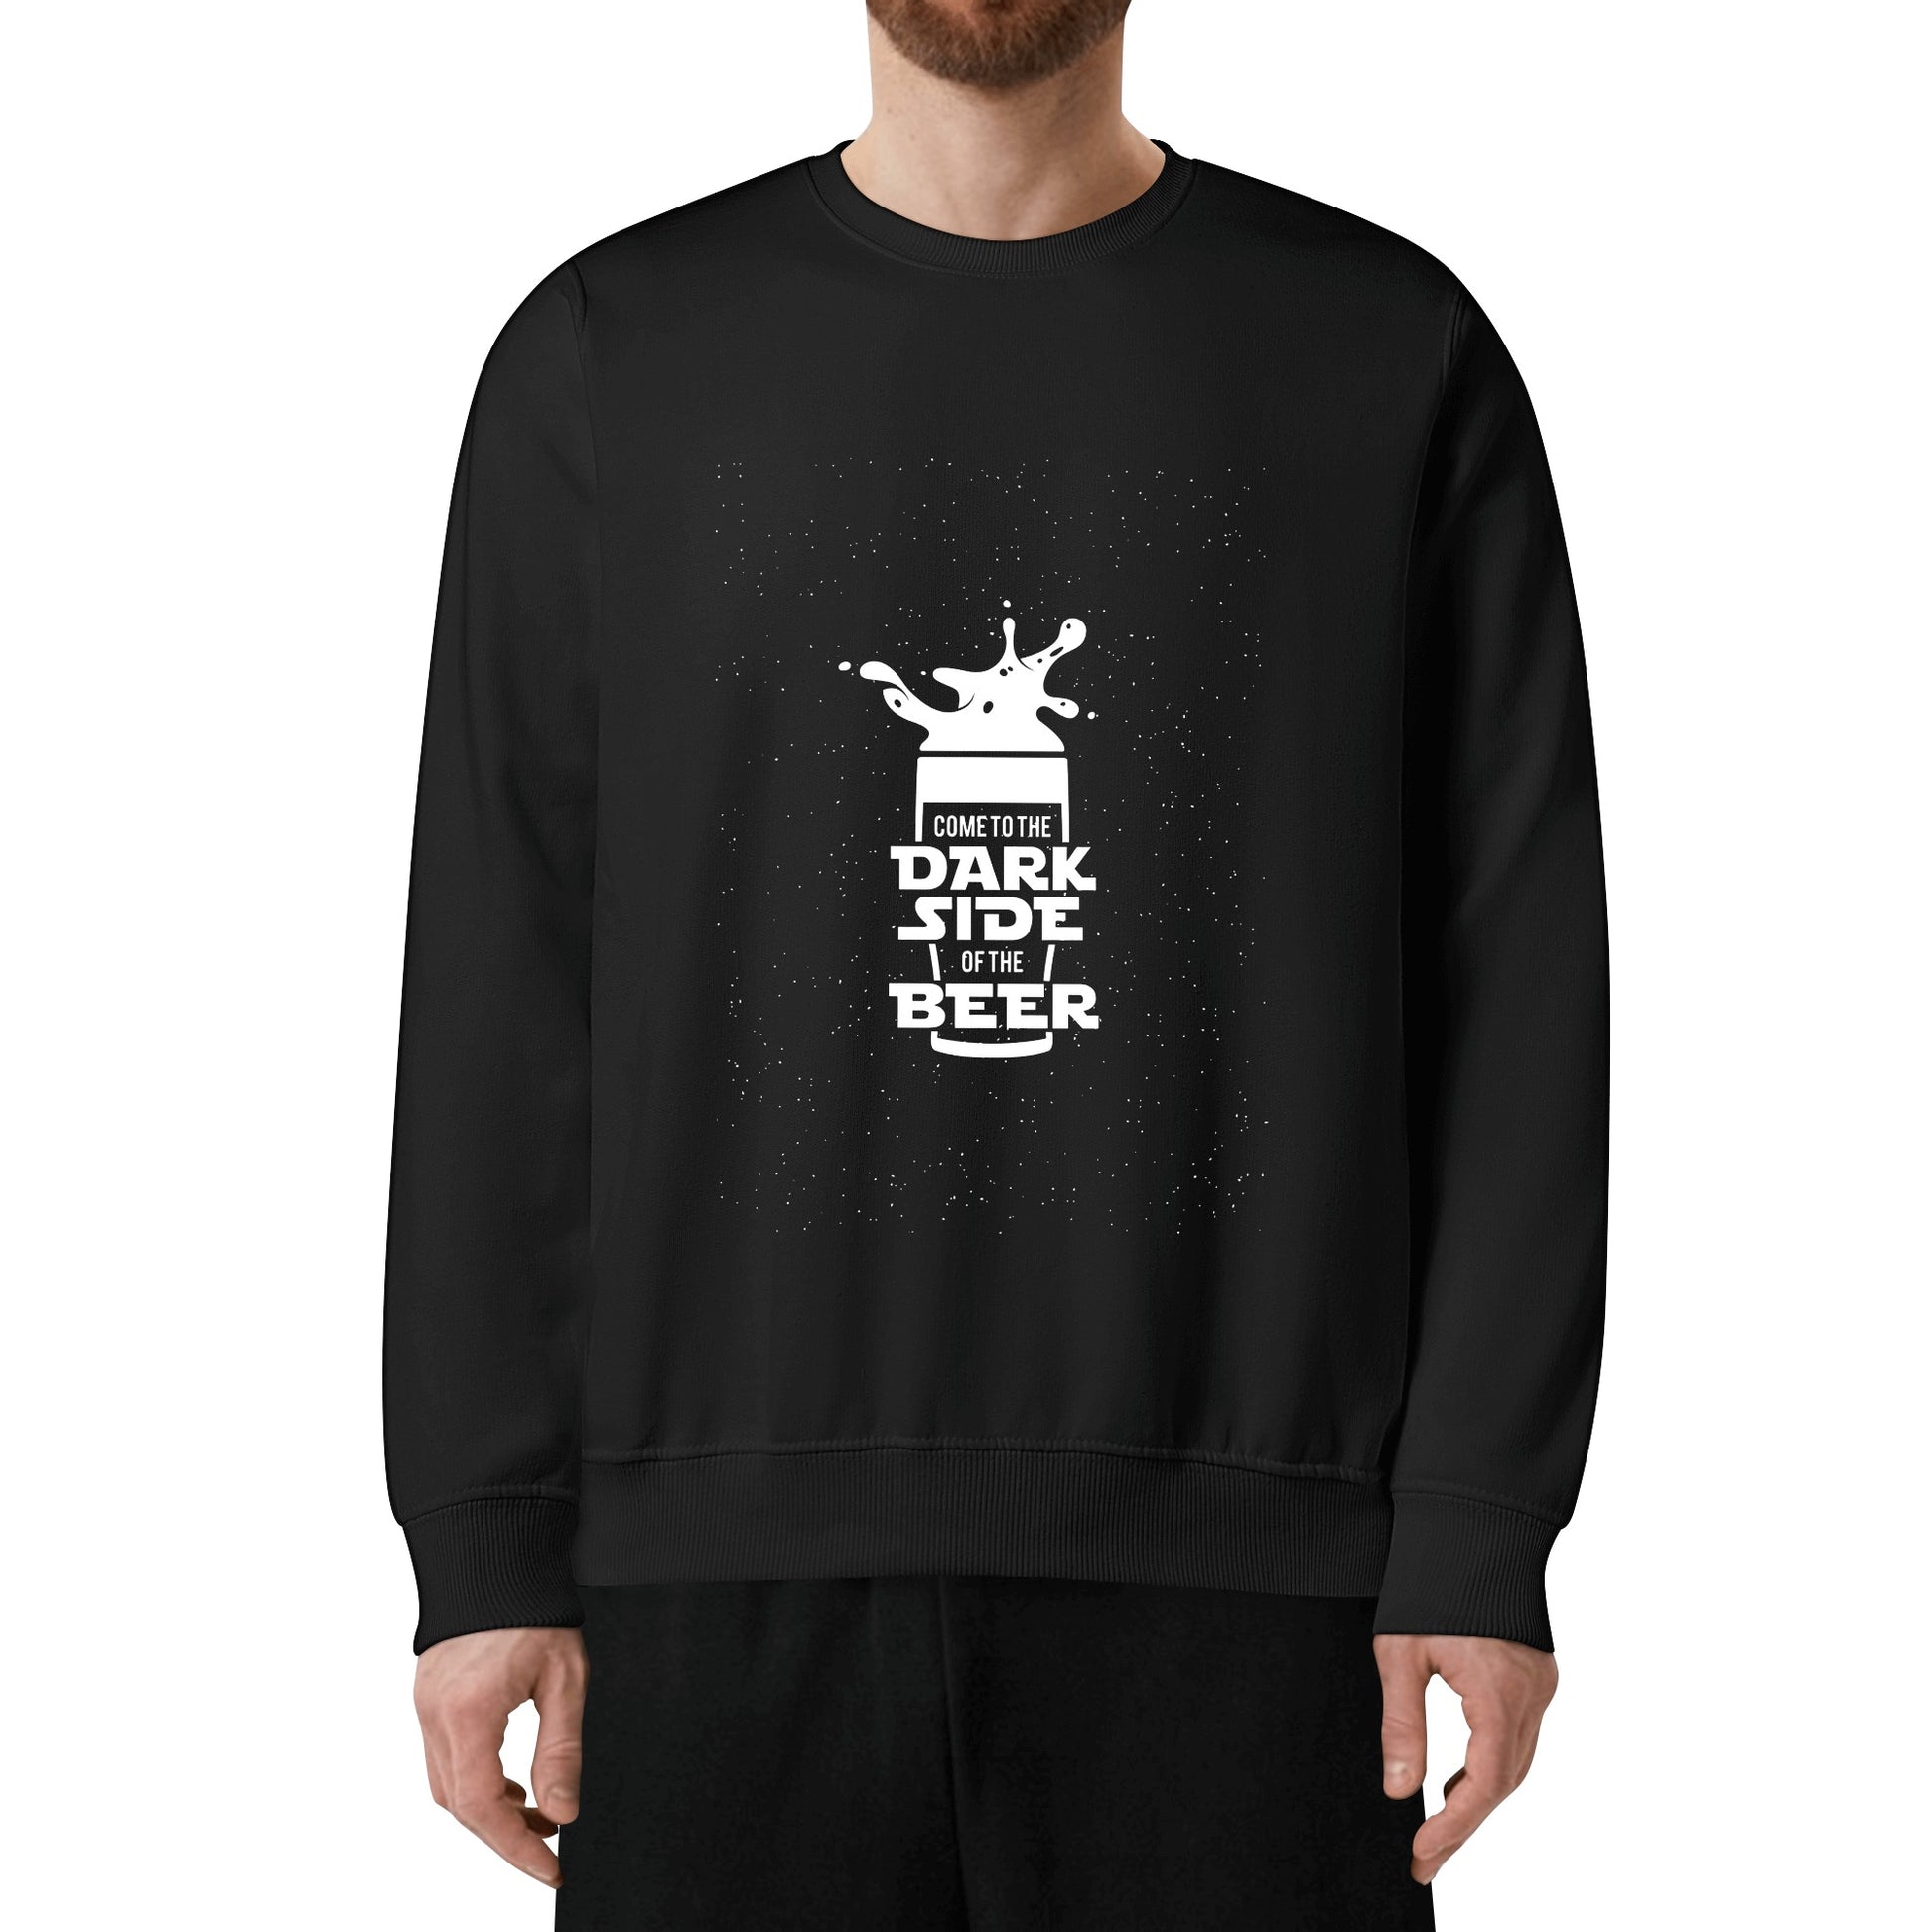 Sweatershirt Cotton come to the dark side of the beer DrinkandArt